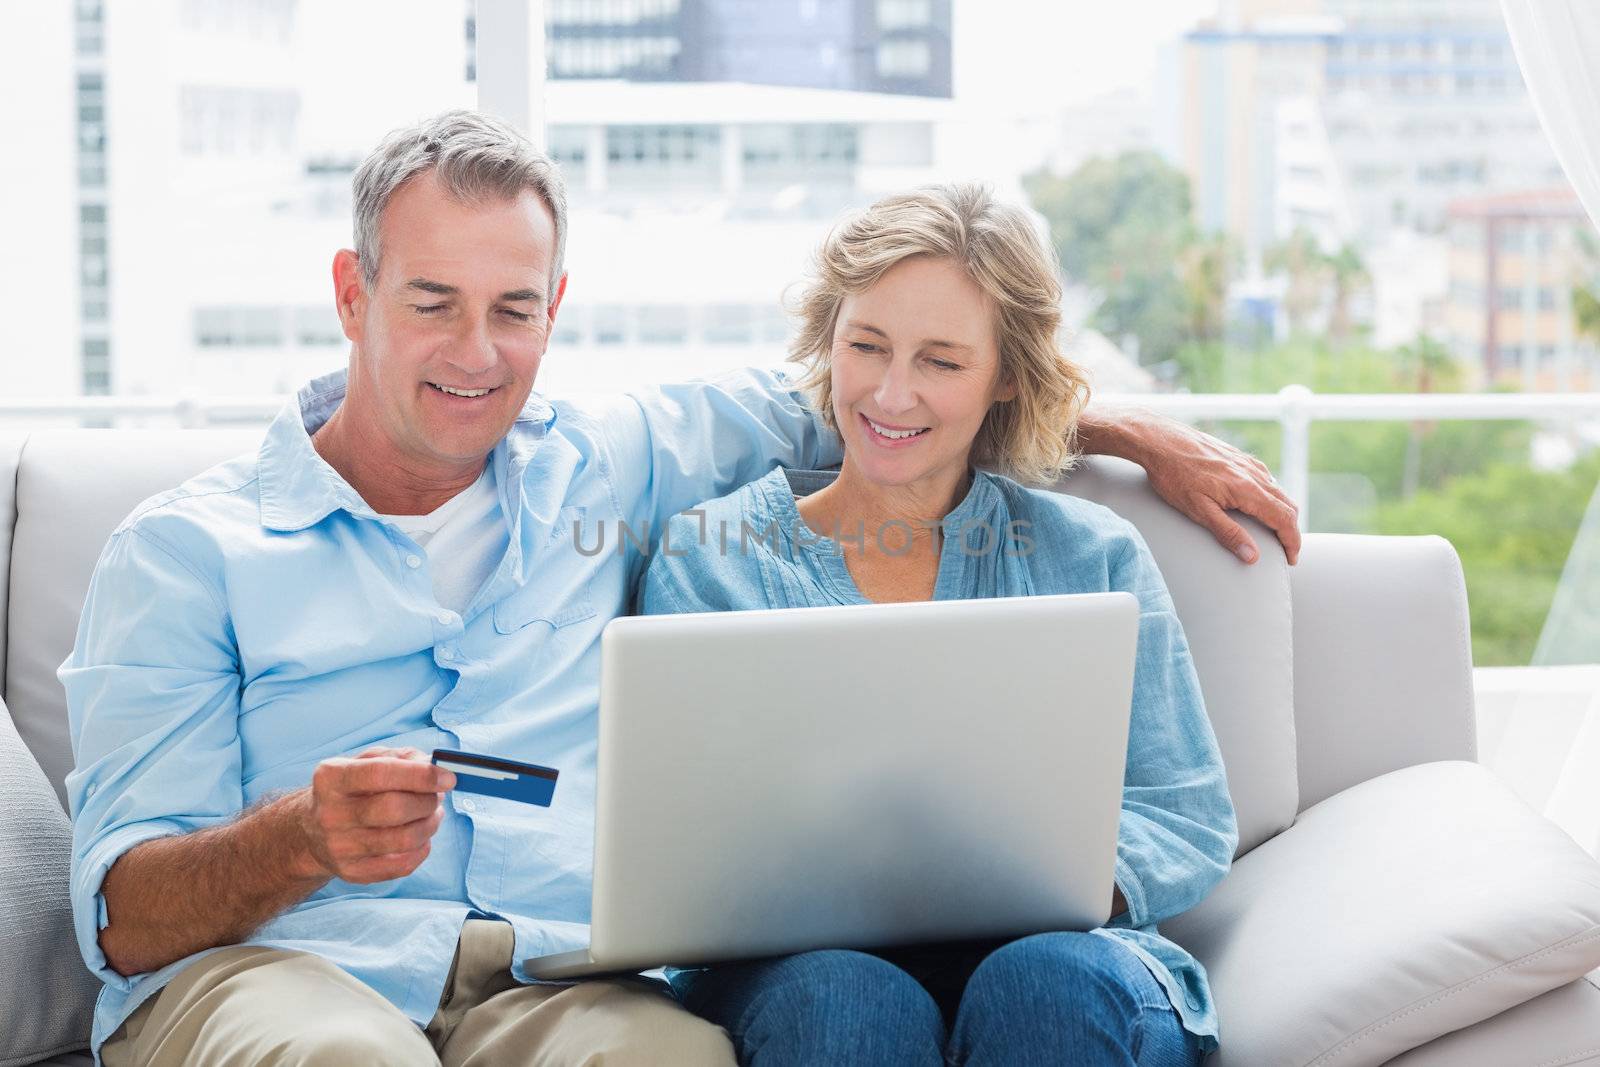 Smiling couple sitting on their couch using the laptop to buy online at home in the sitting room